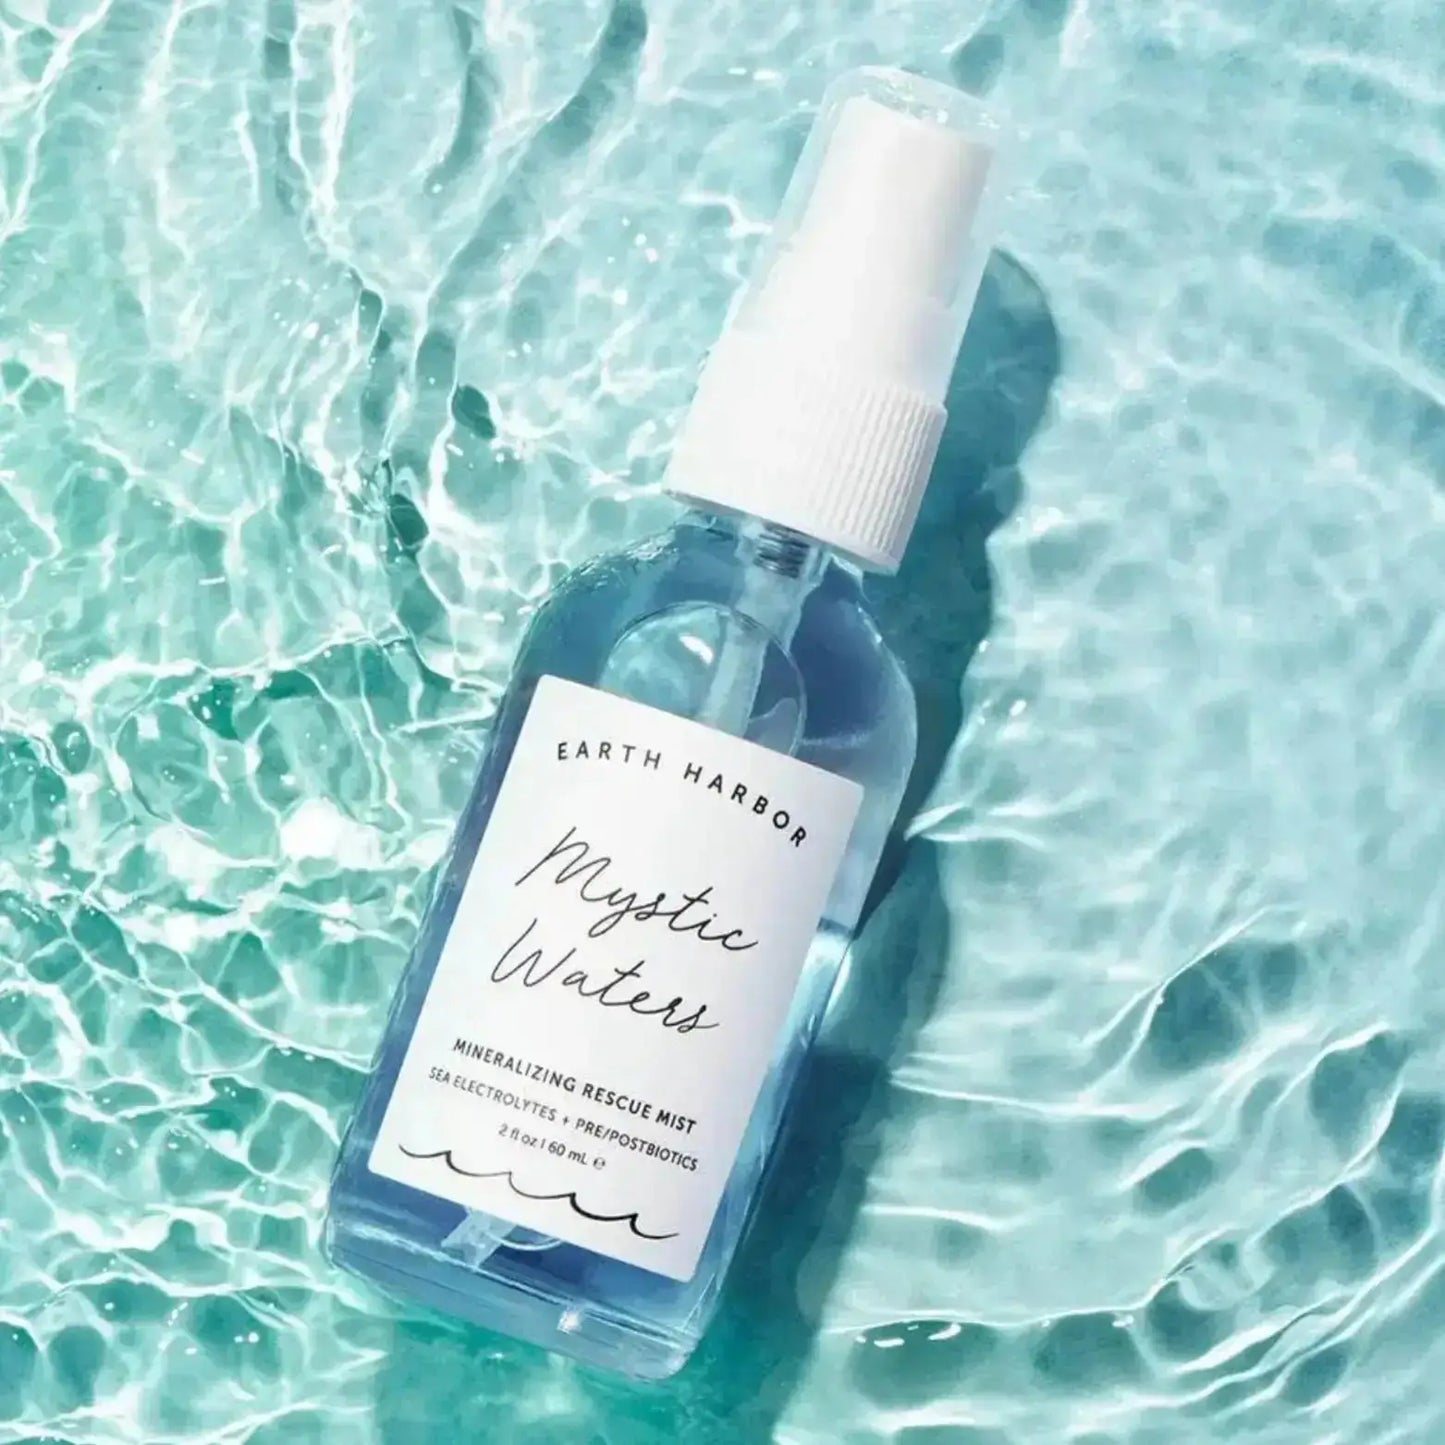 Earth Harbor Mystic Waters Mineralizing Rescue Mist with Sea Minerals